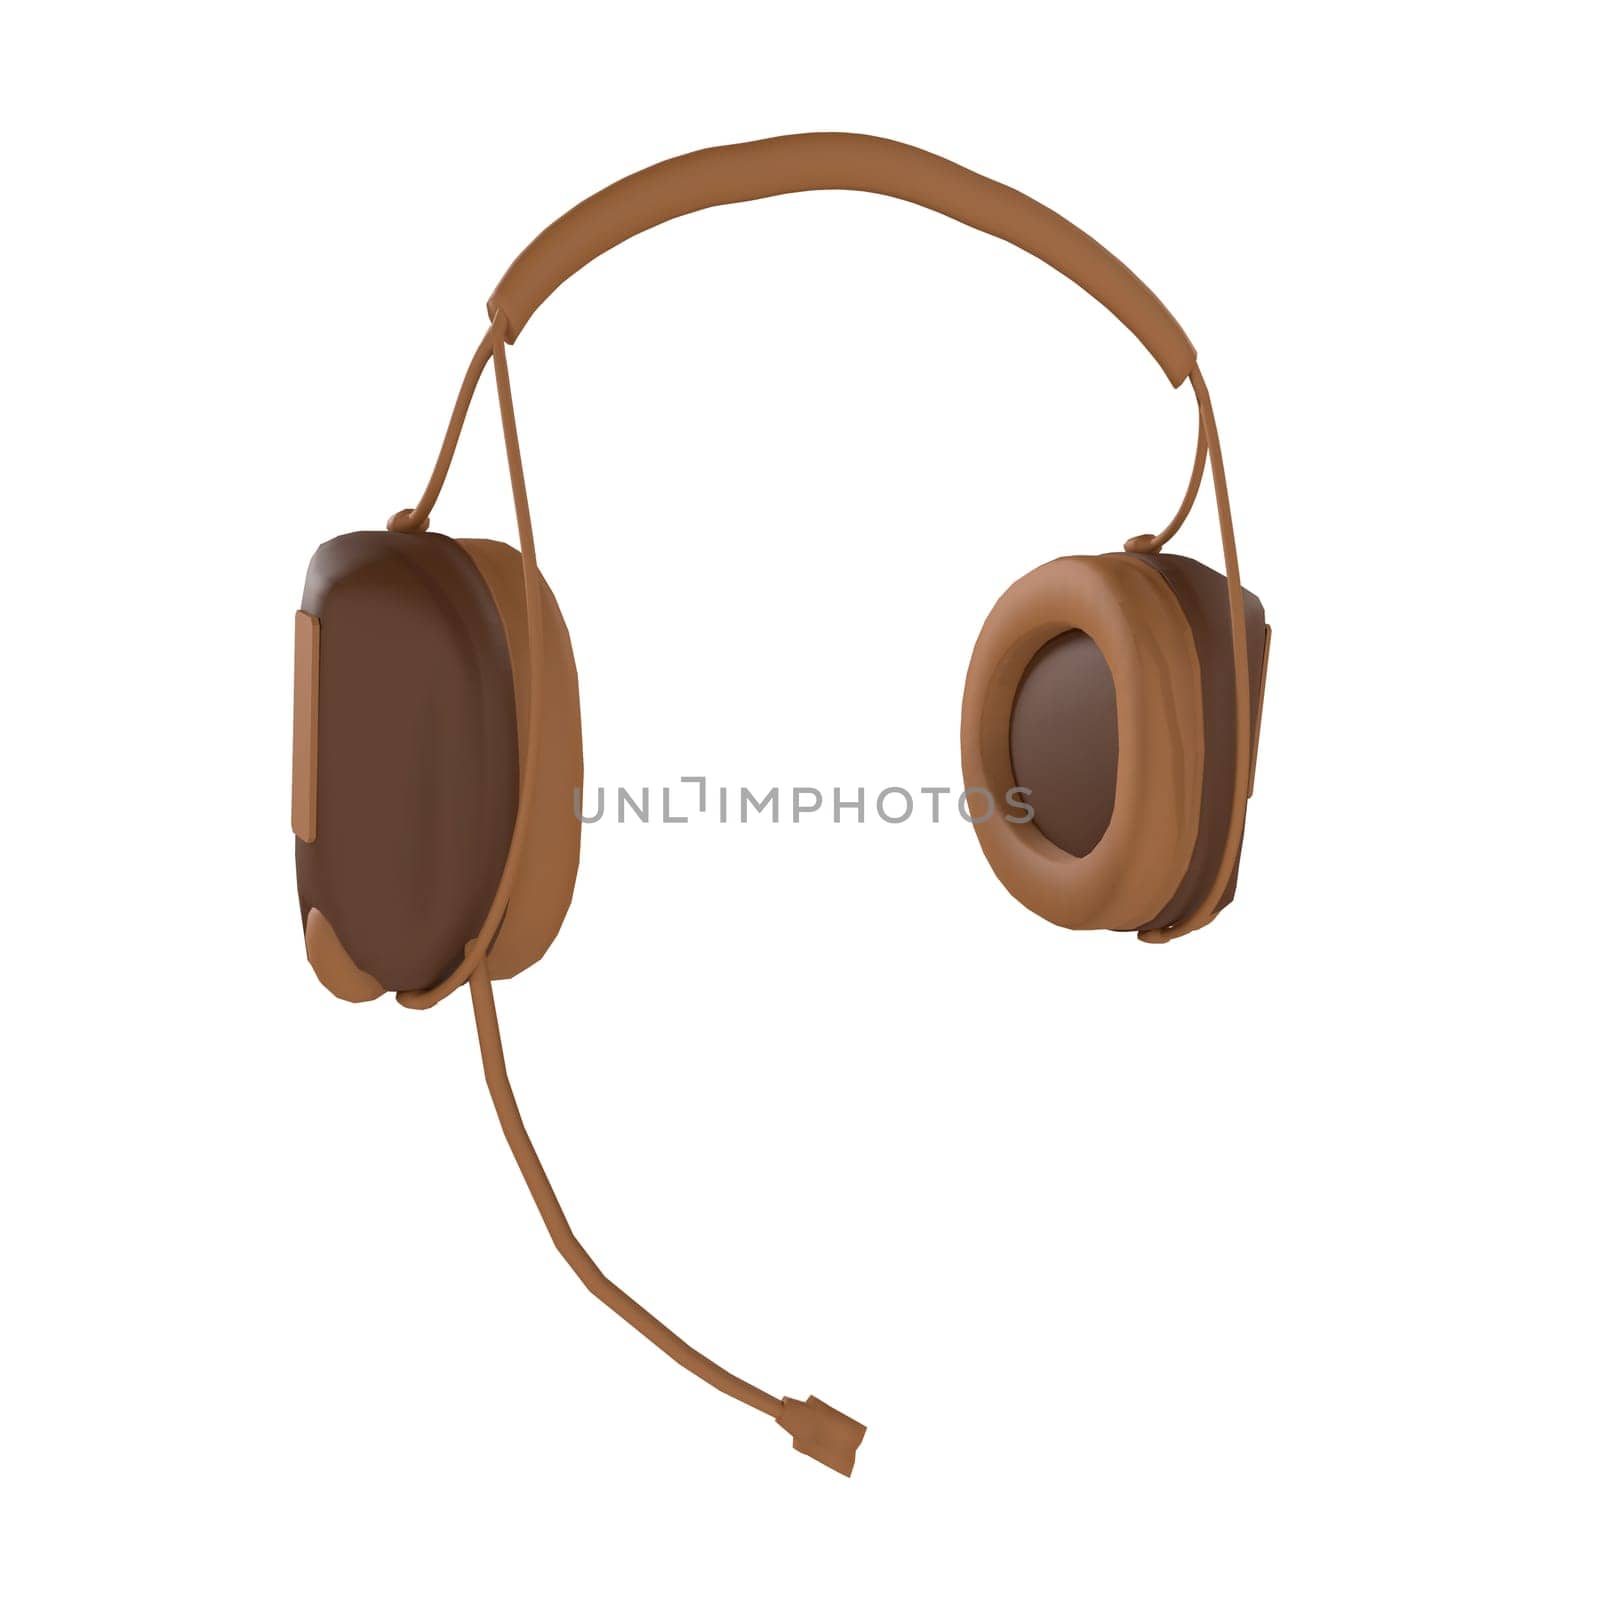 Military Headset isolated on white background. High quality 3d illustration